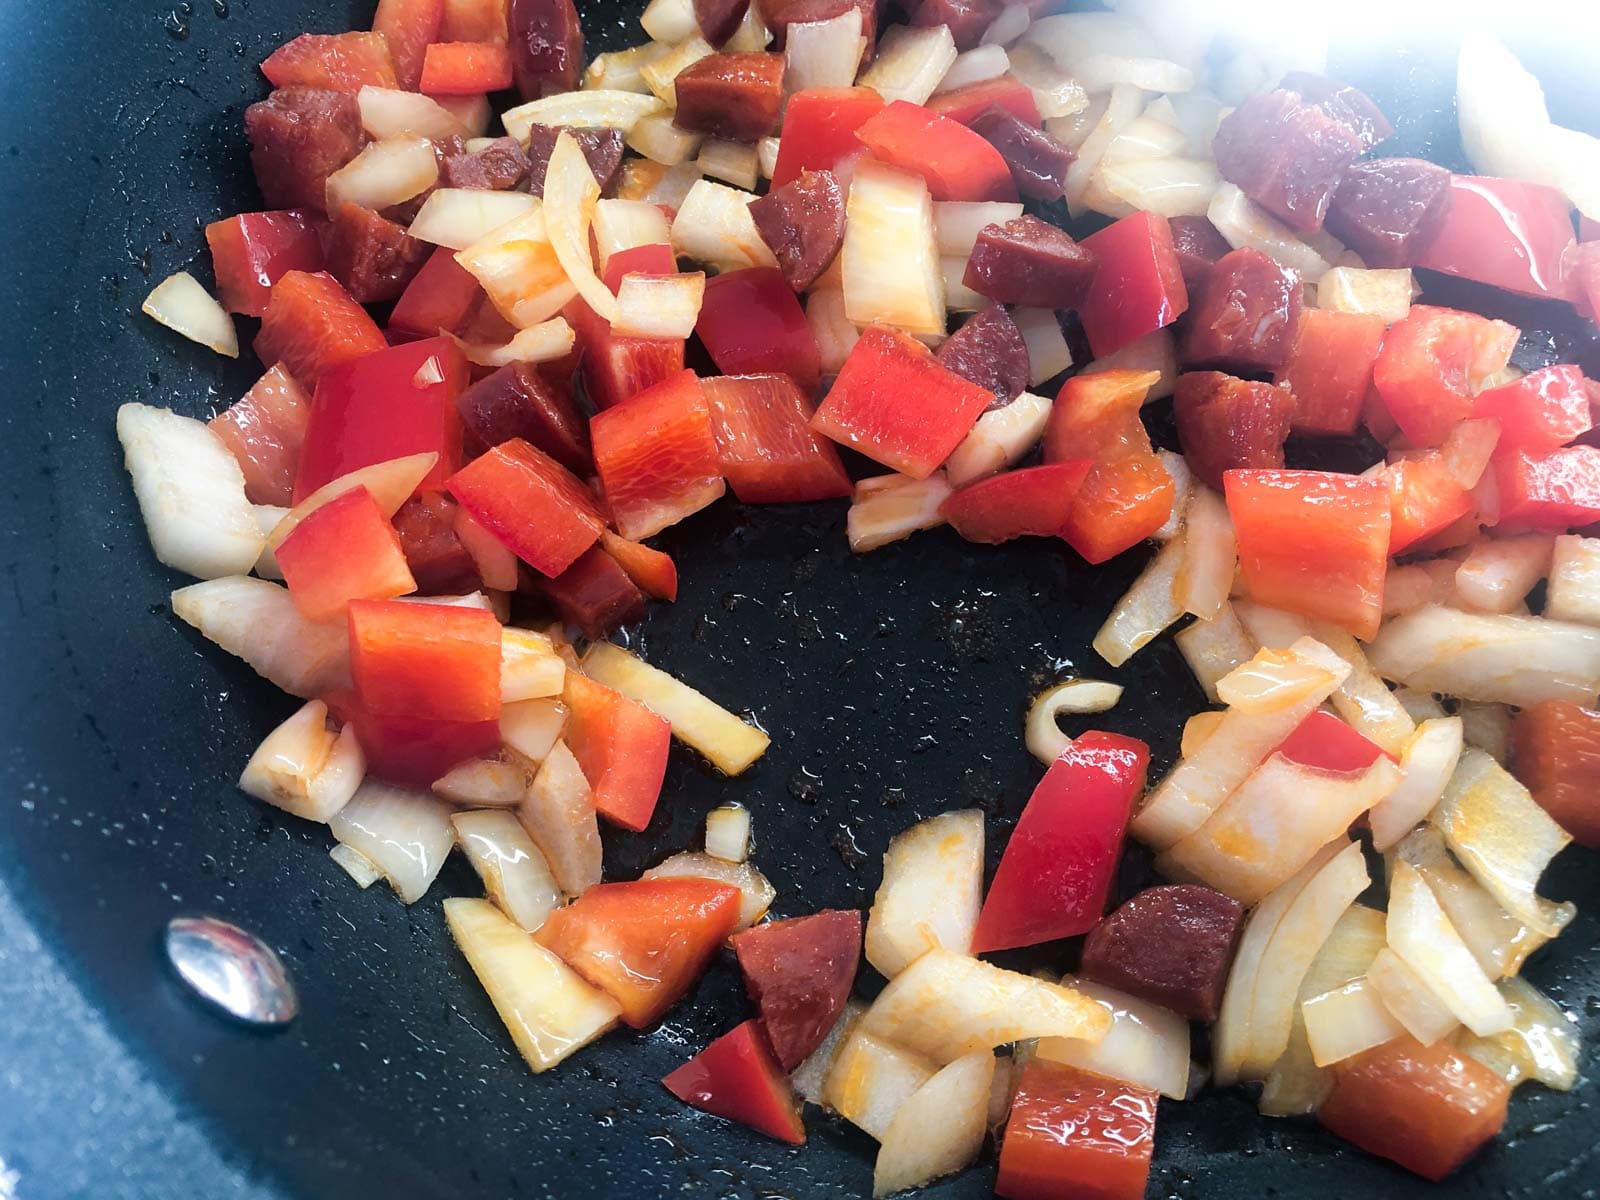 onions, red peppers and chorizo frying with the oils from the chorizo starting to leak out to colour the vegetables a lovely red.